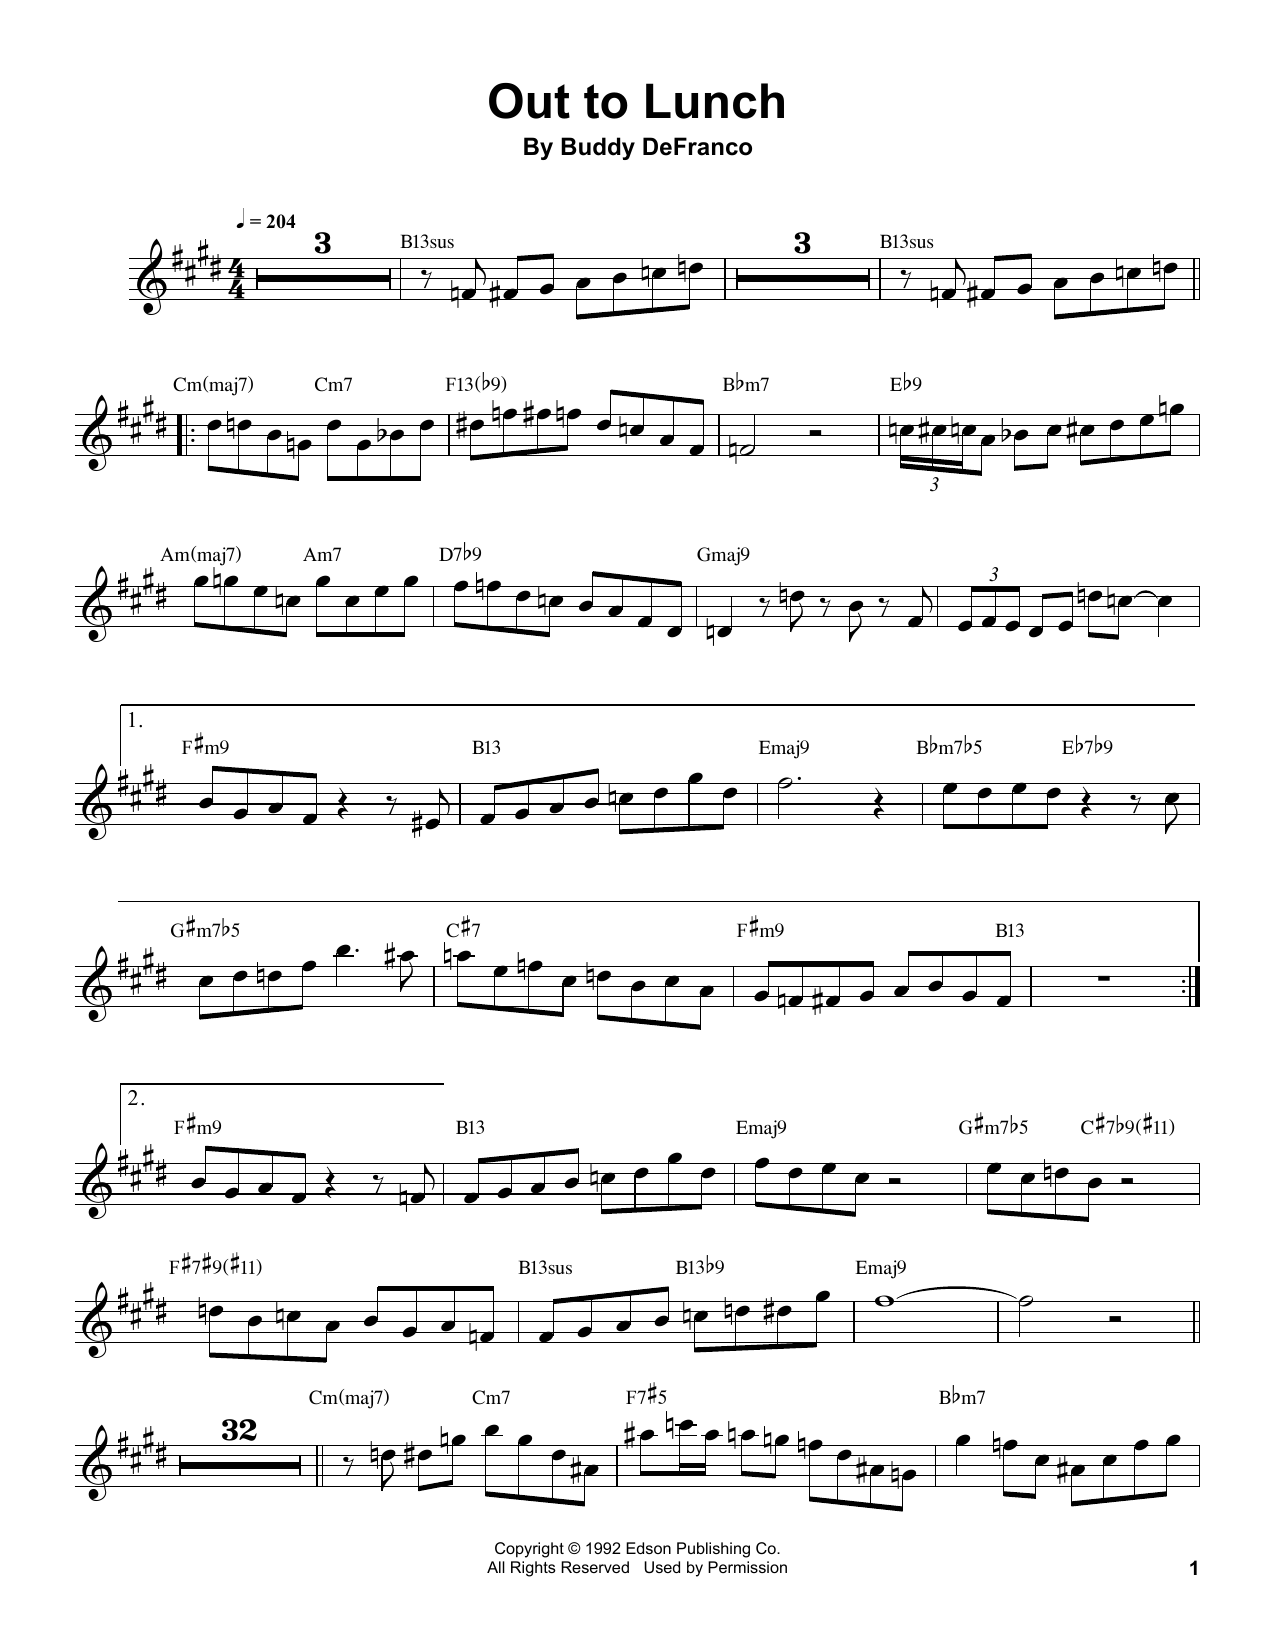 Download Buddy DeFranco Out To Lunch Sheet Music